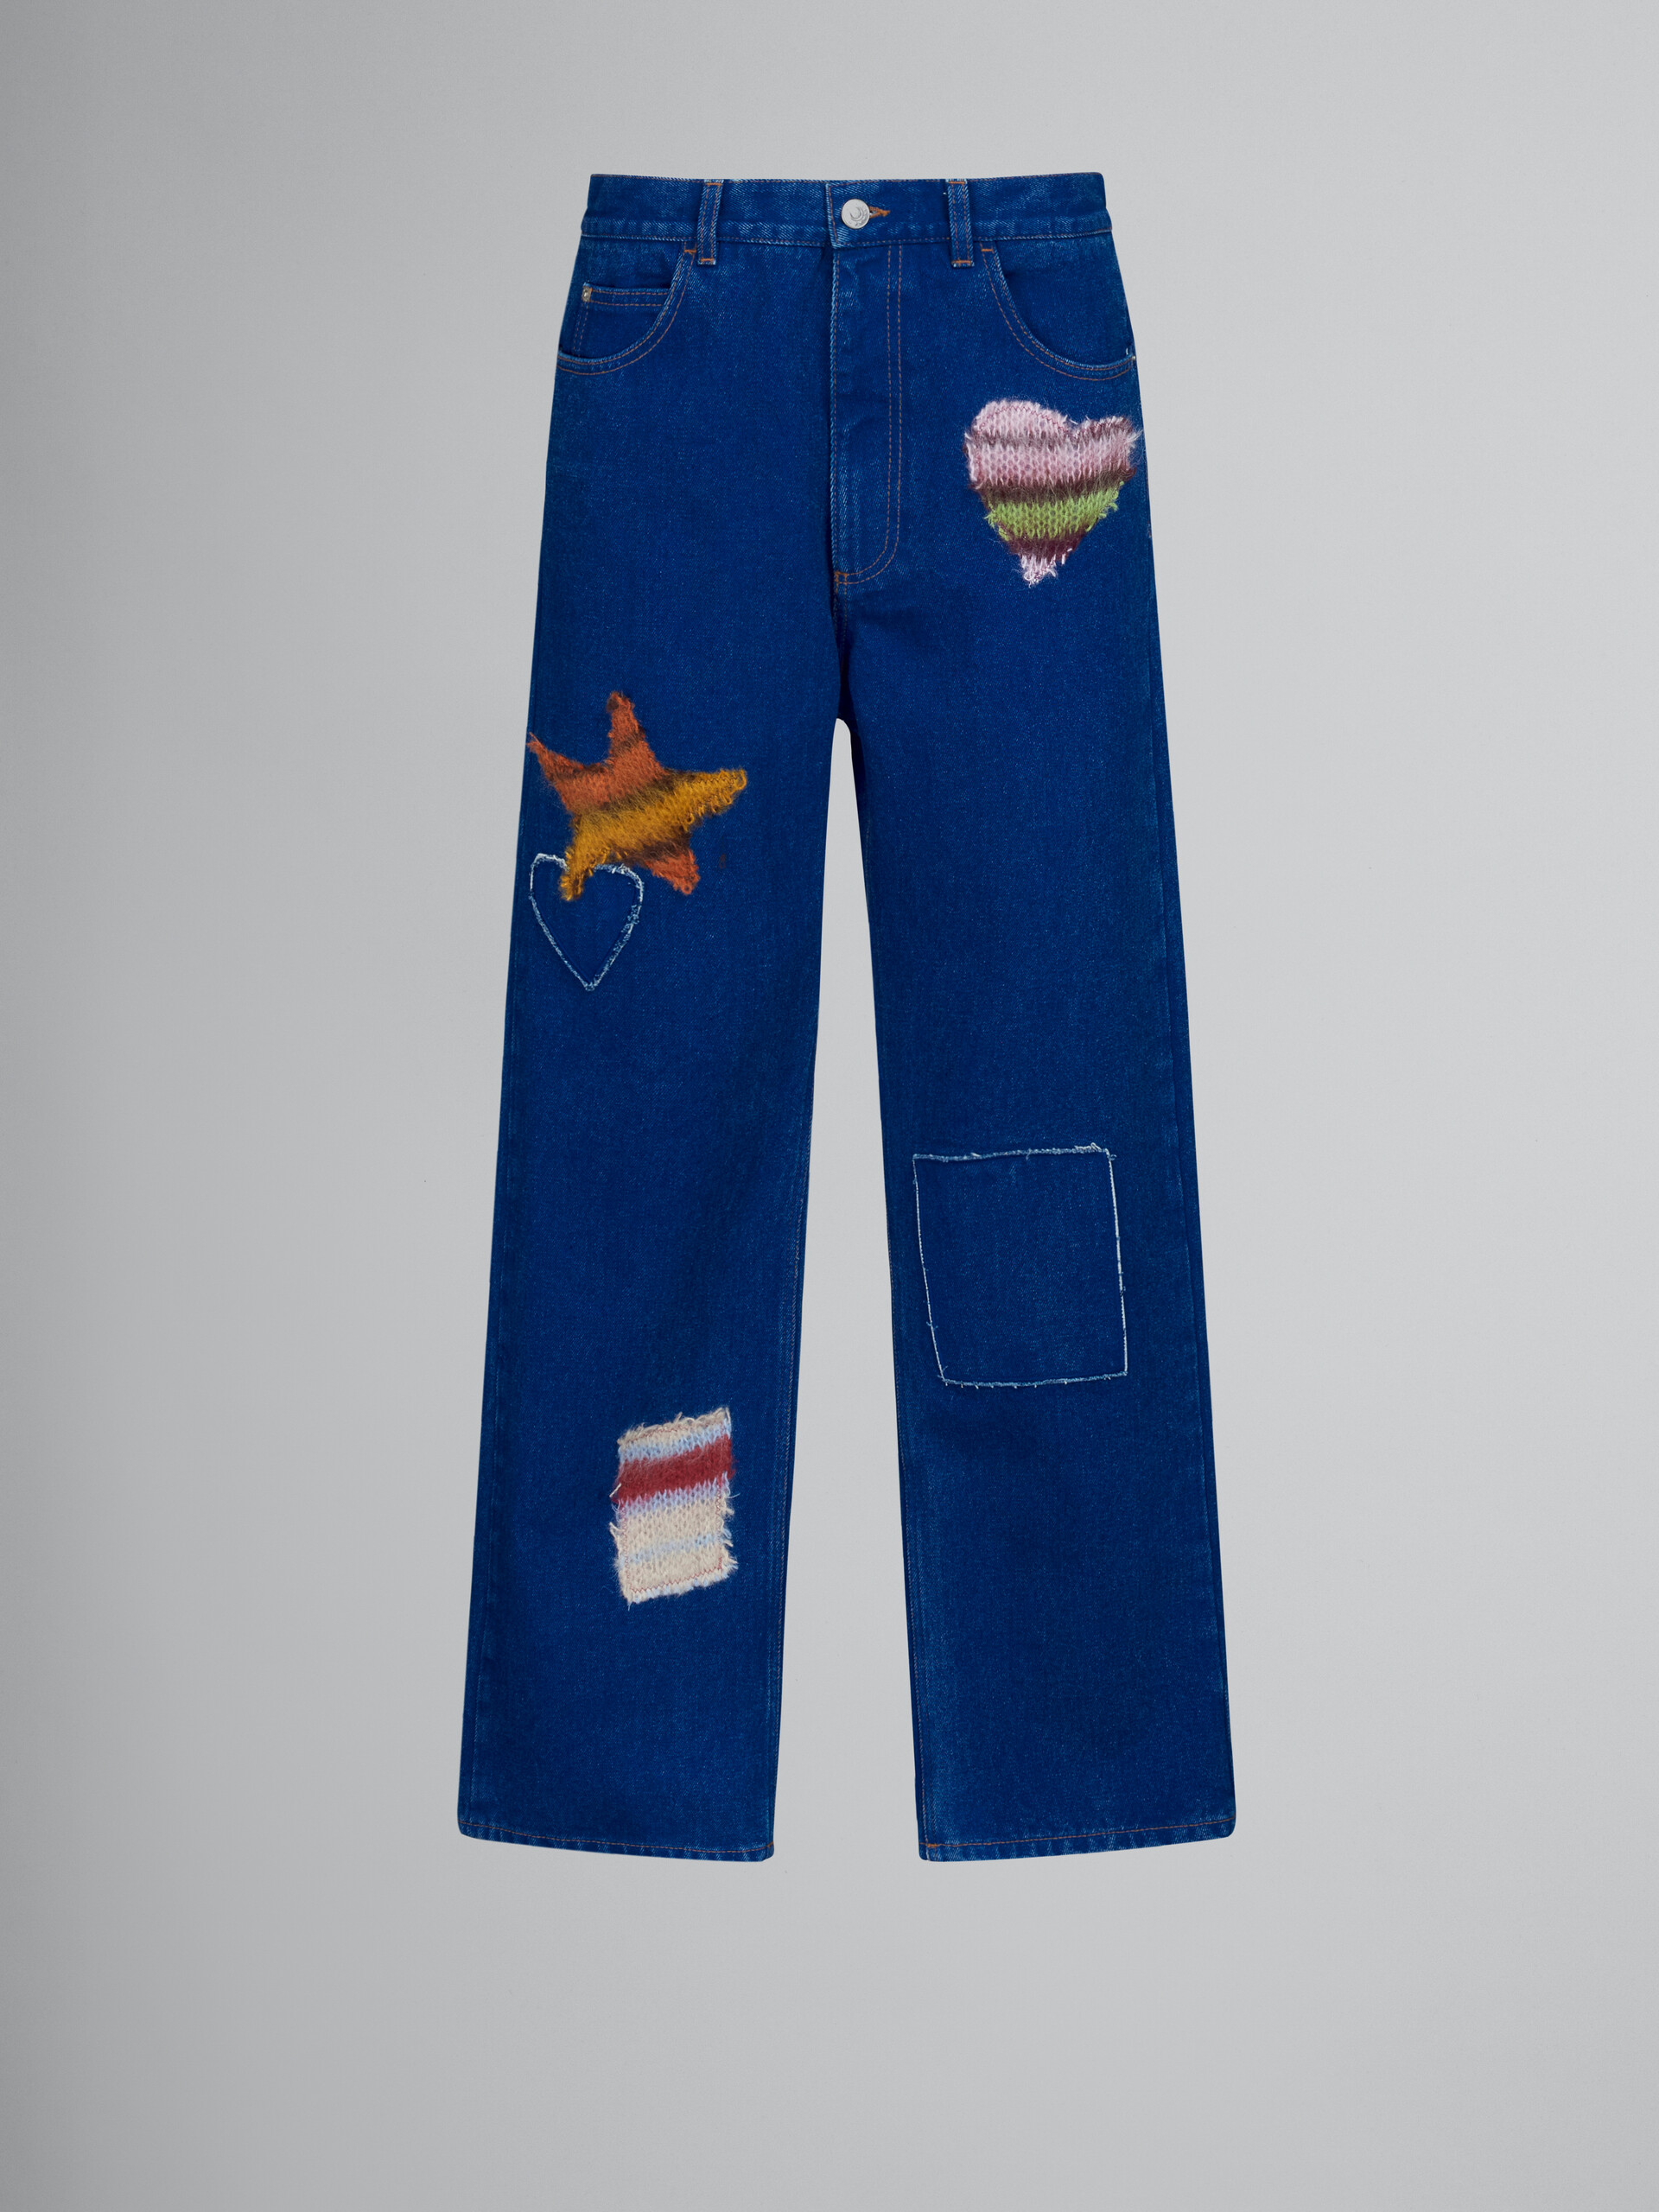 Blue coated denim jeans with mohair patches - Pants - Image 1